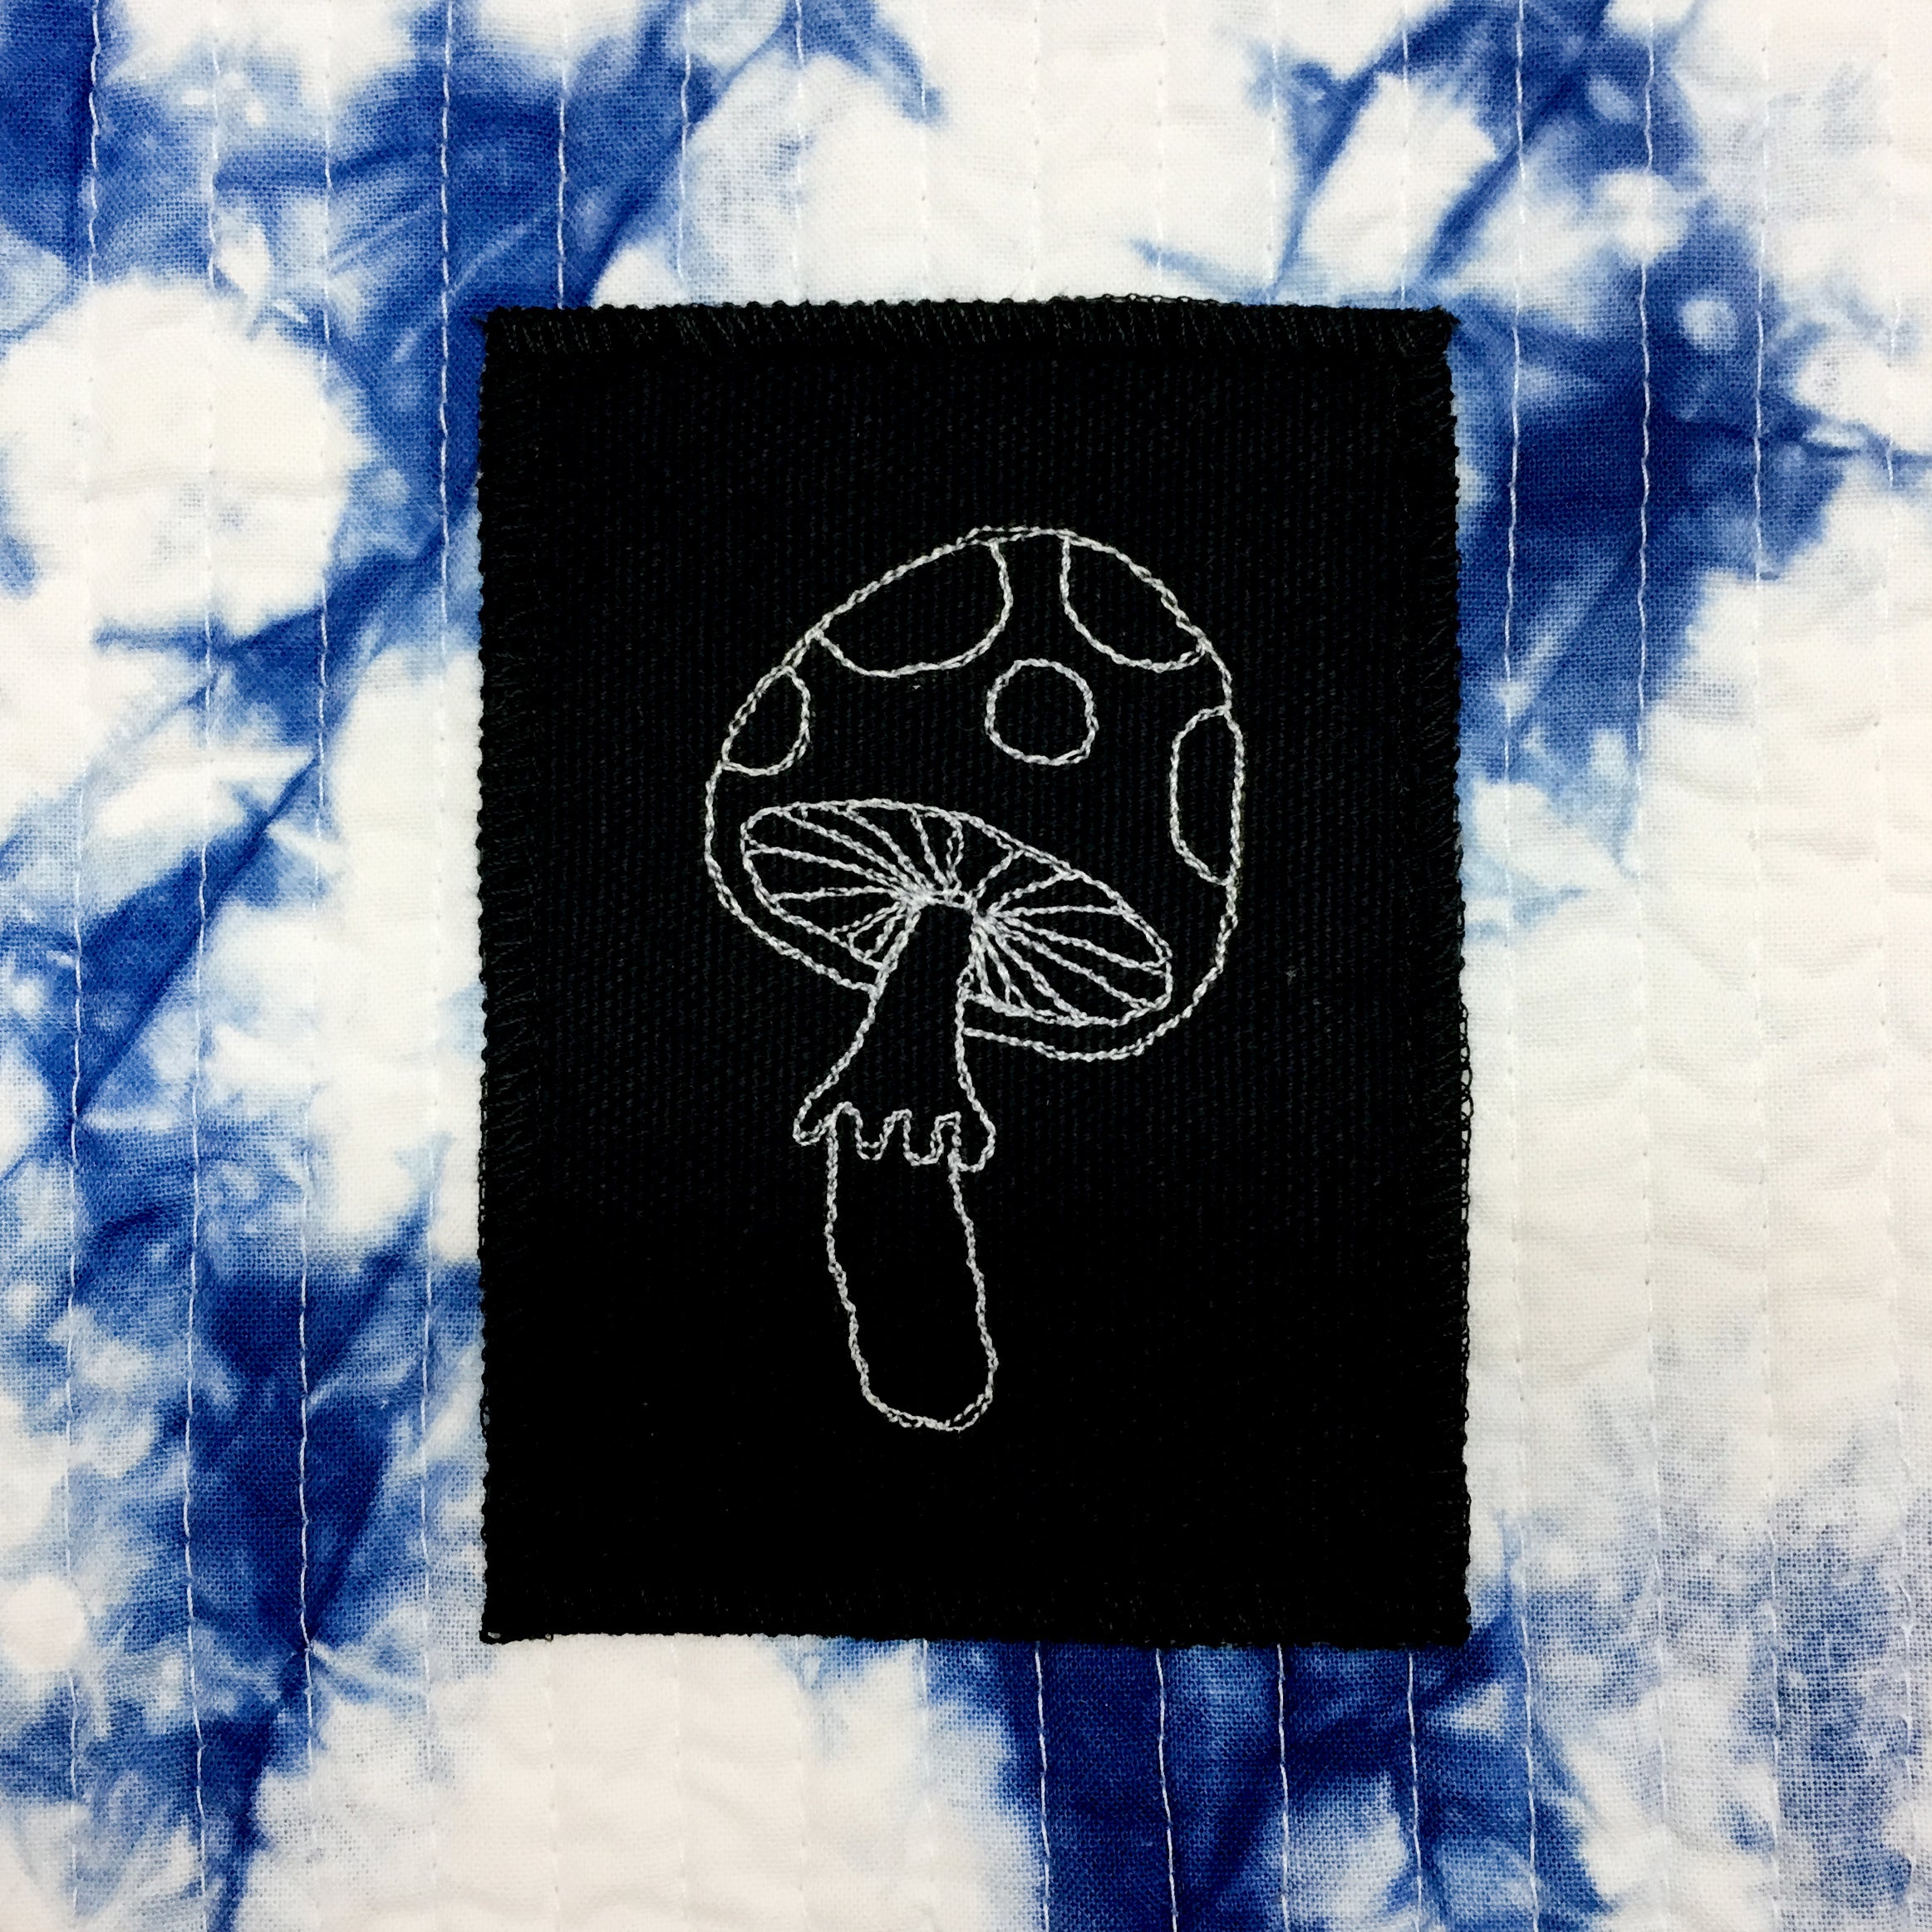 Stitch Witch, Embroidered, One of A Kind White Mushroom on Black Patch